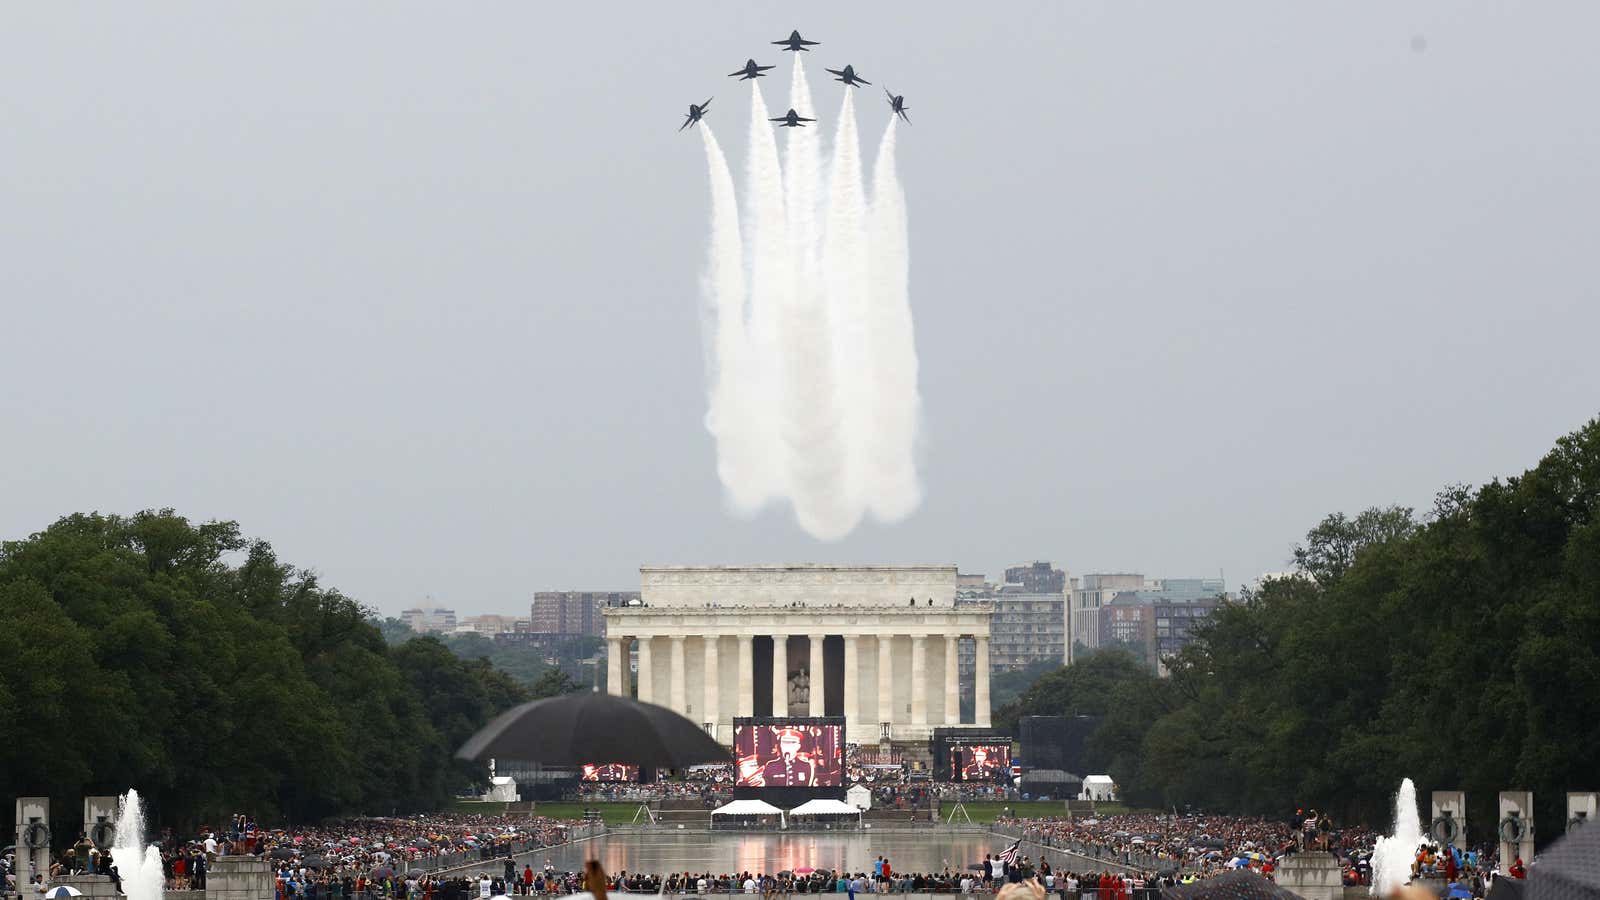 The U.S. Navy Blue Angels flight demonstration team performs a flyover above the Lincoln Memorial during Independence Day celebrations, Thursday, July 4, 2019, on theâ€¦